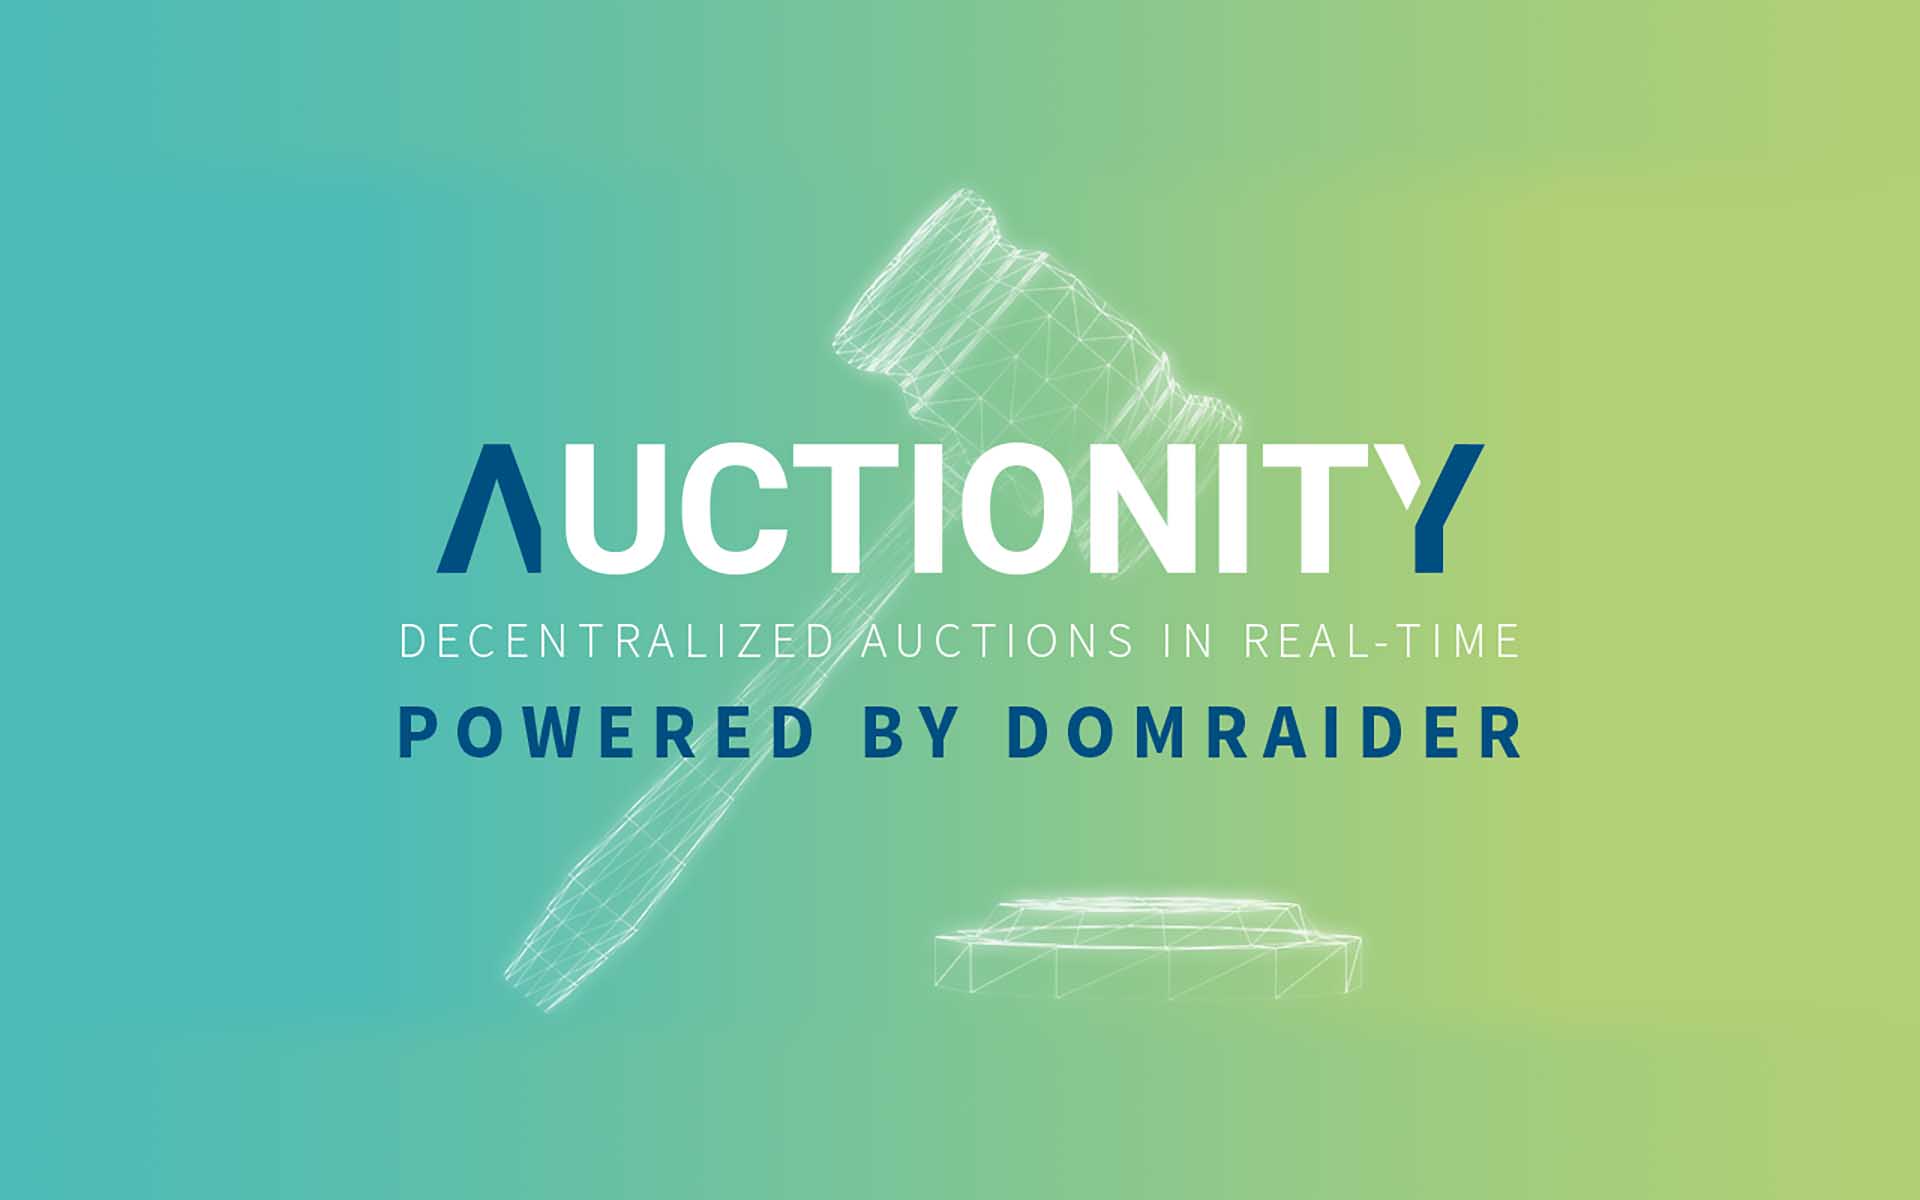 DomRaider Group Unveils the First Version of their Blockchain Based Auction Solution under the New Brand Name Auctionity